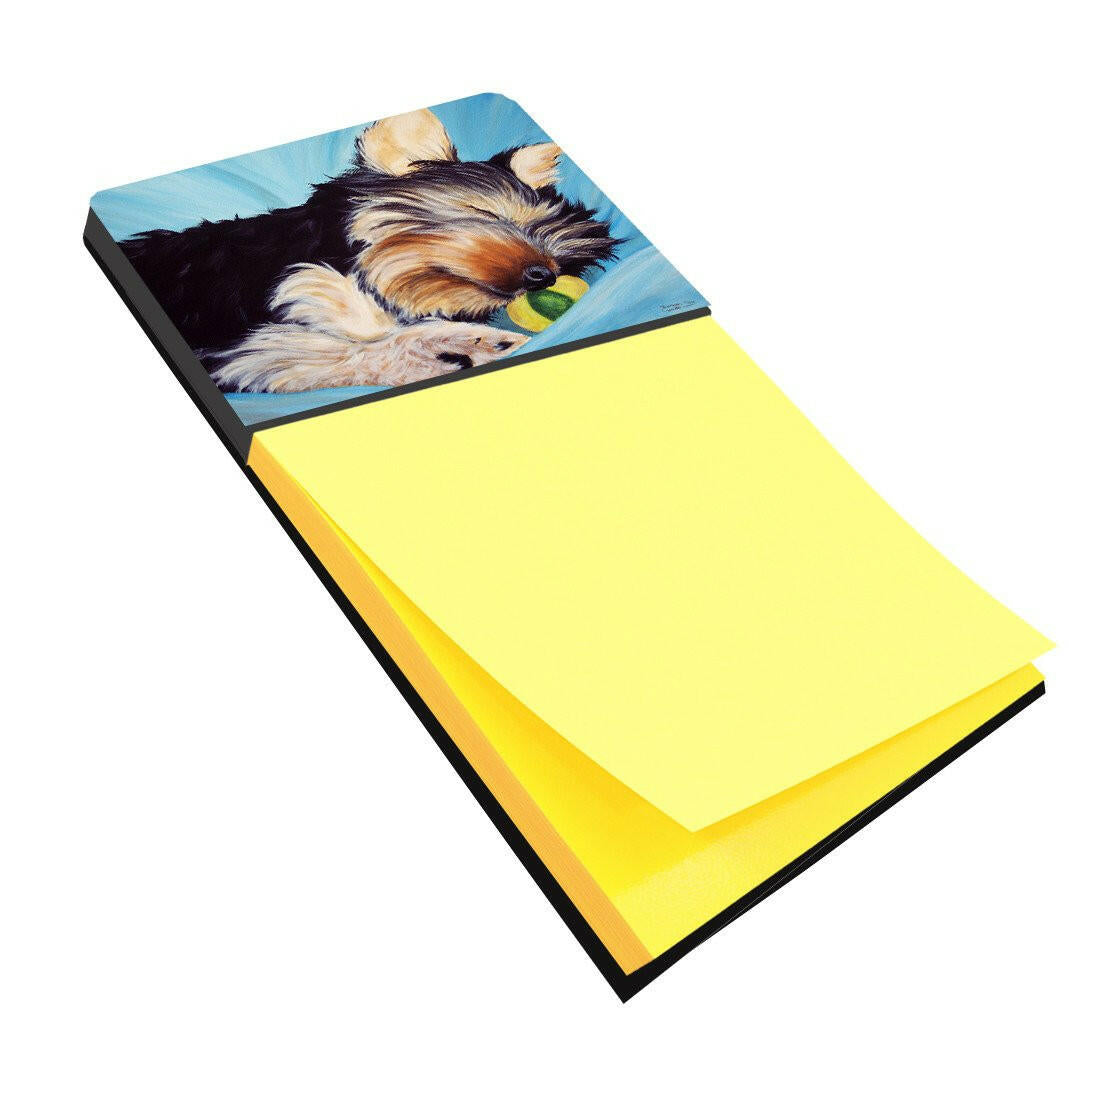 Naptime Yorkie Yorkshire Terrier Sticky Note Holder AMB1075SN by Caroline's Treasures